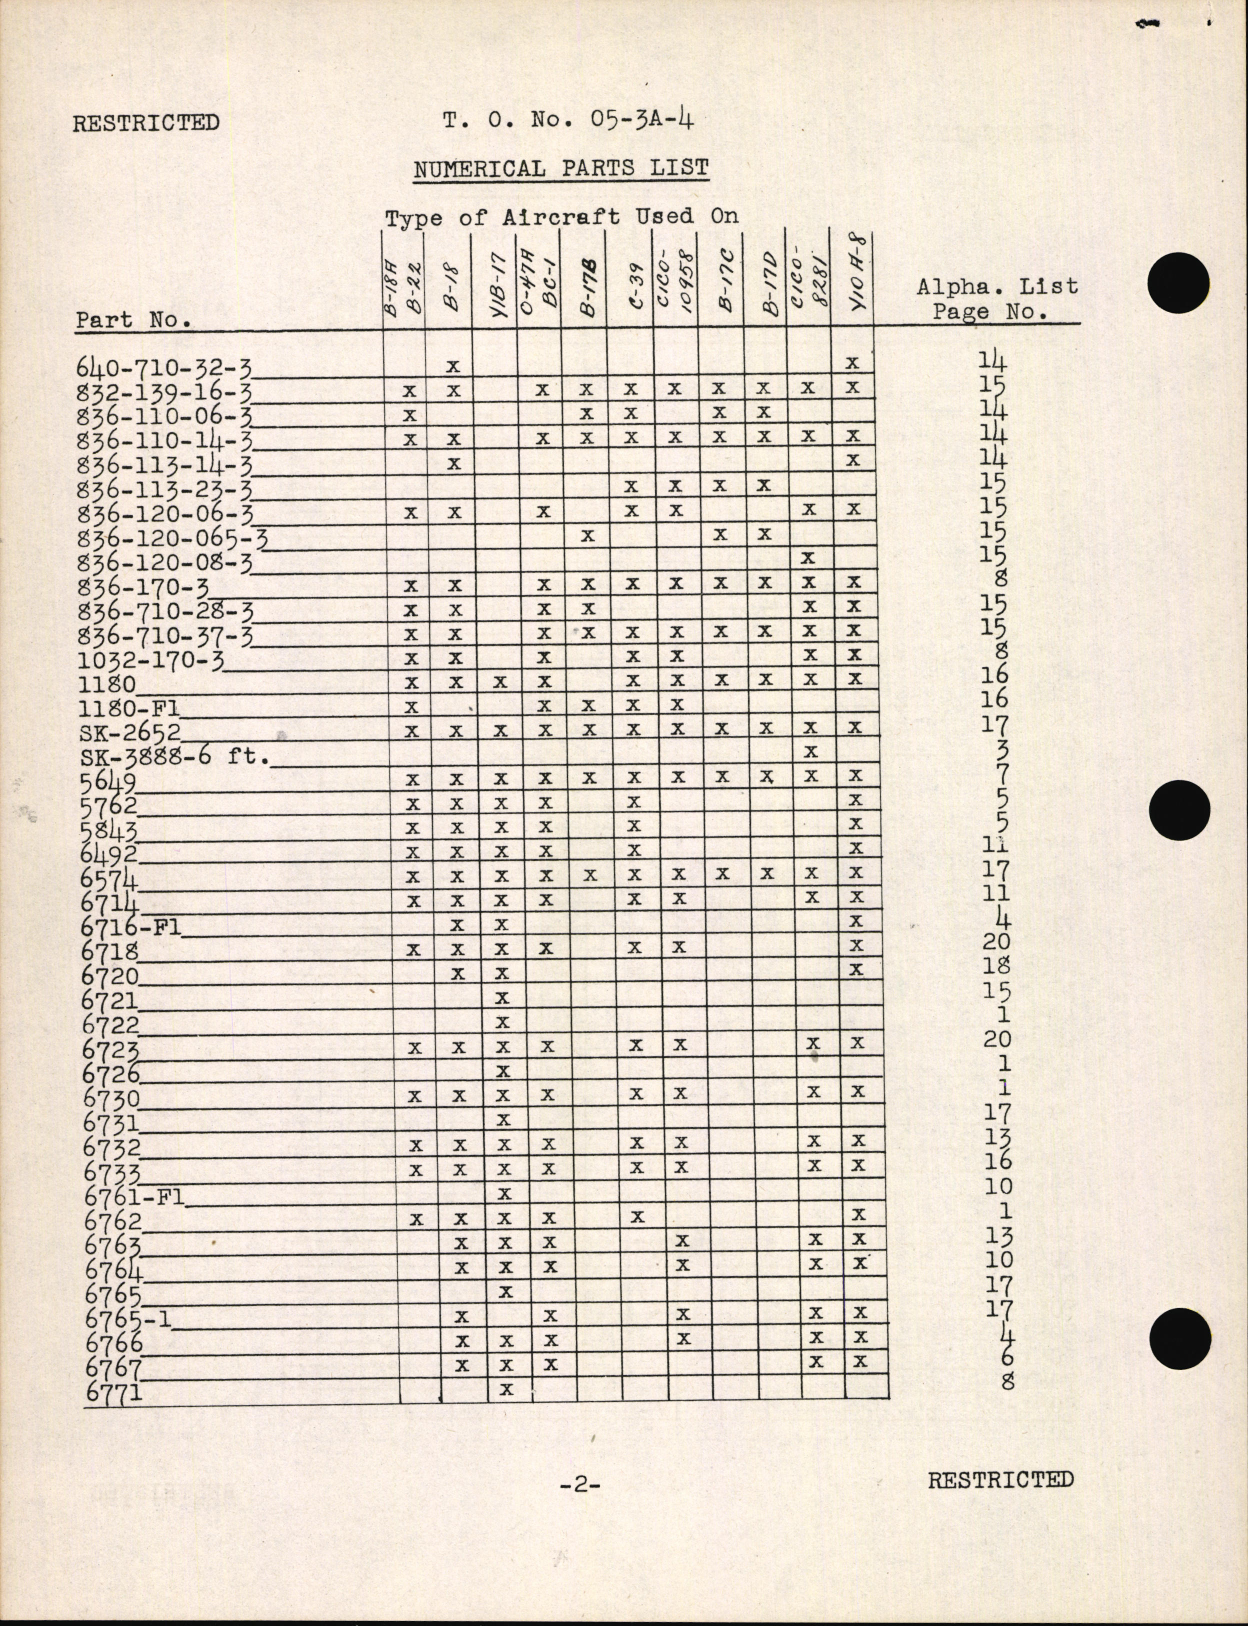 Sample page 6 from AirCorps Library document: Parts Catalog for Fuel Mixture Indicators